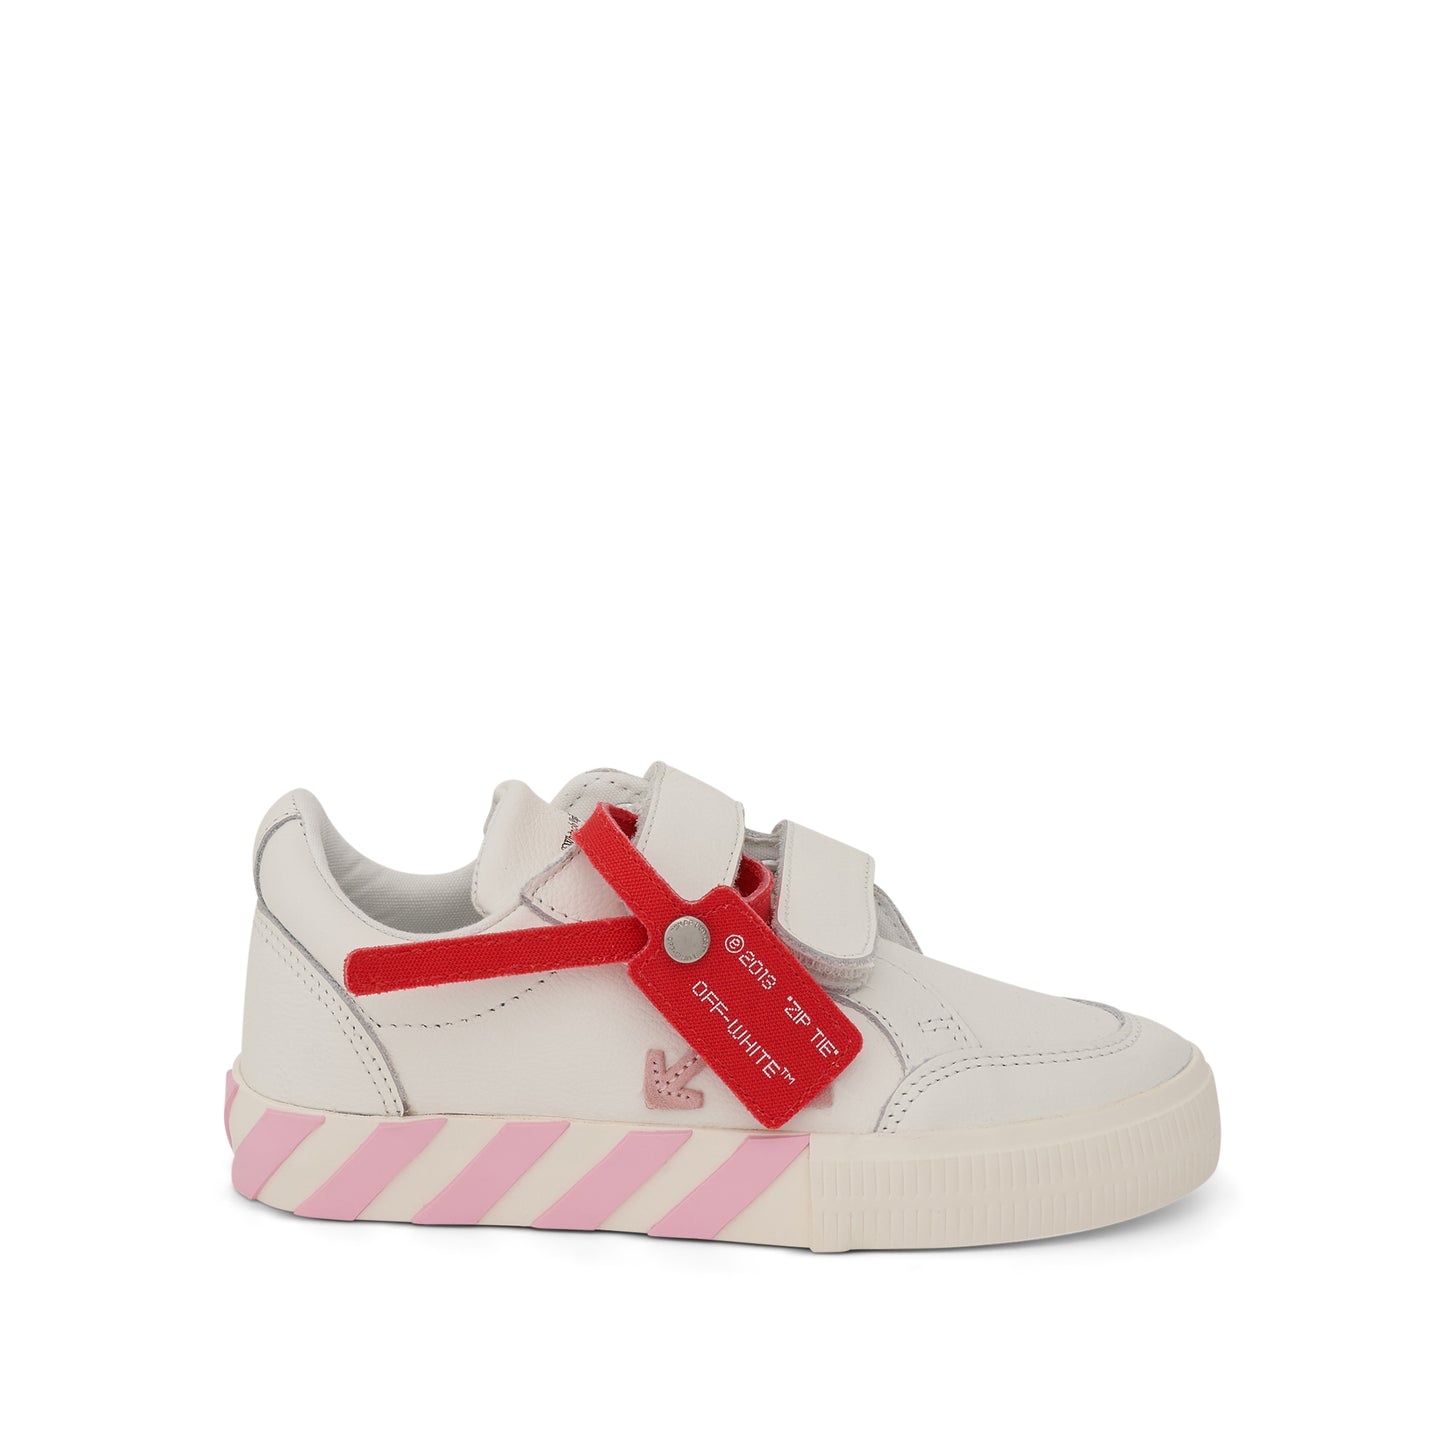 Velcro Vulcanized Sneakers in White/Pink